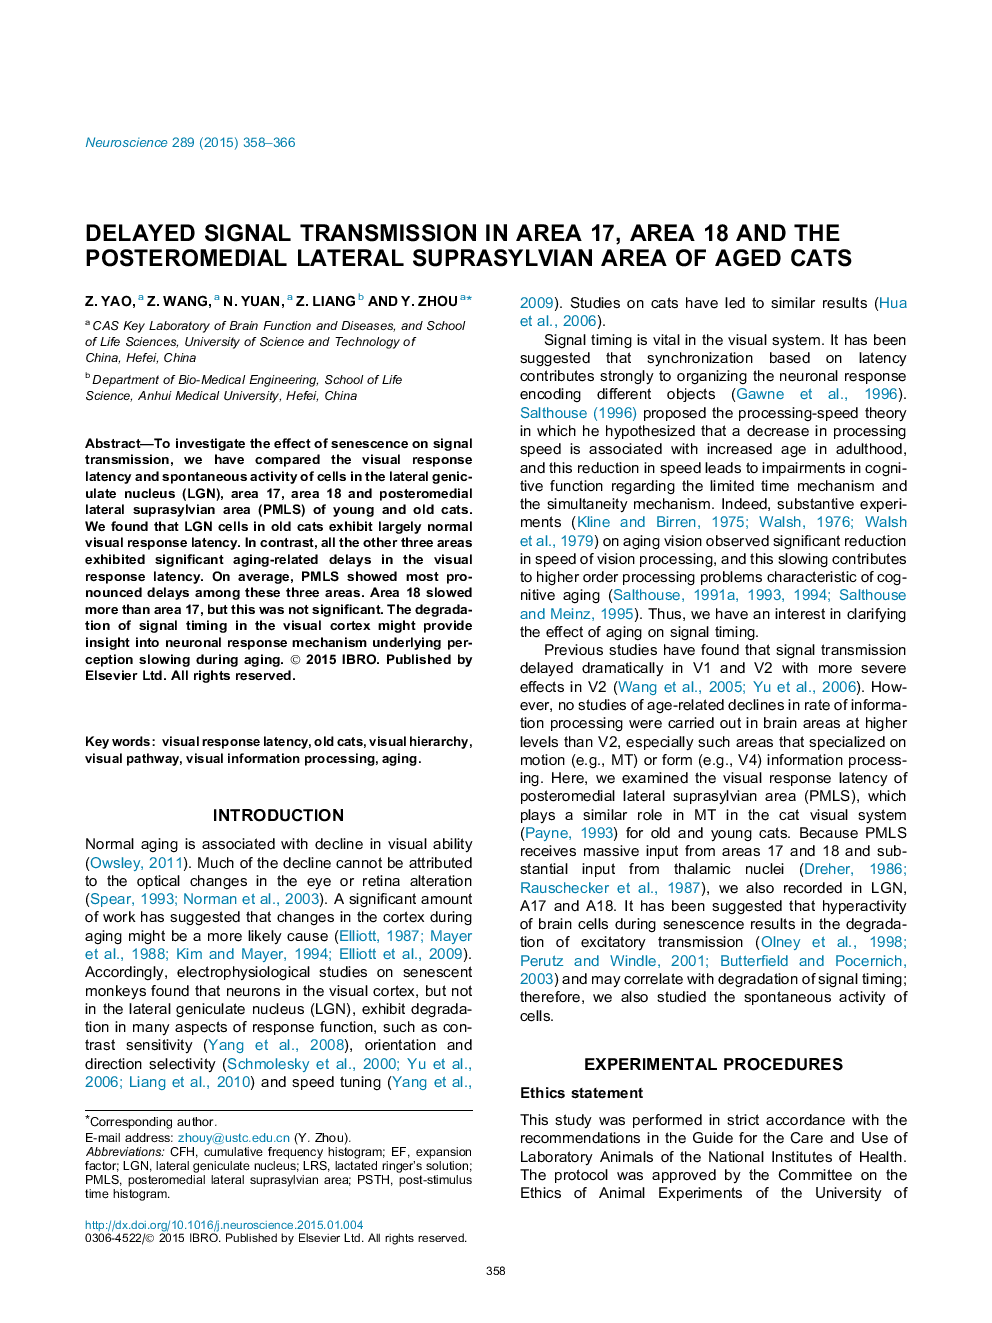 Delayed signal transmission in area 17, area 18 and the posteromedial lateral suprasylvian area of aged cats